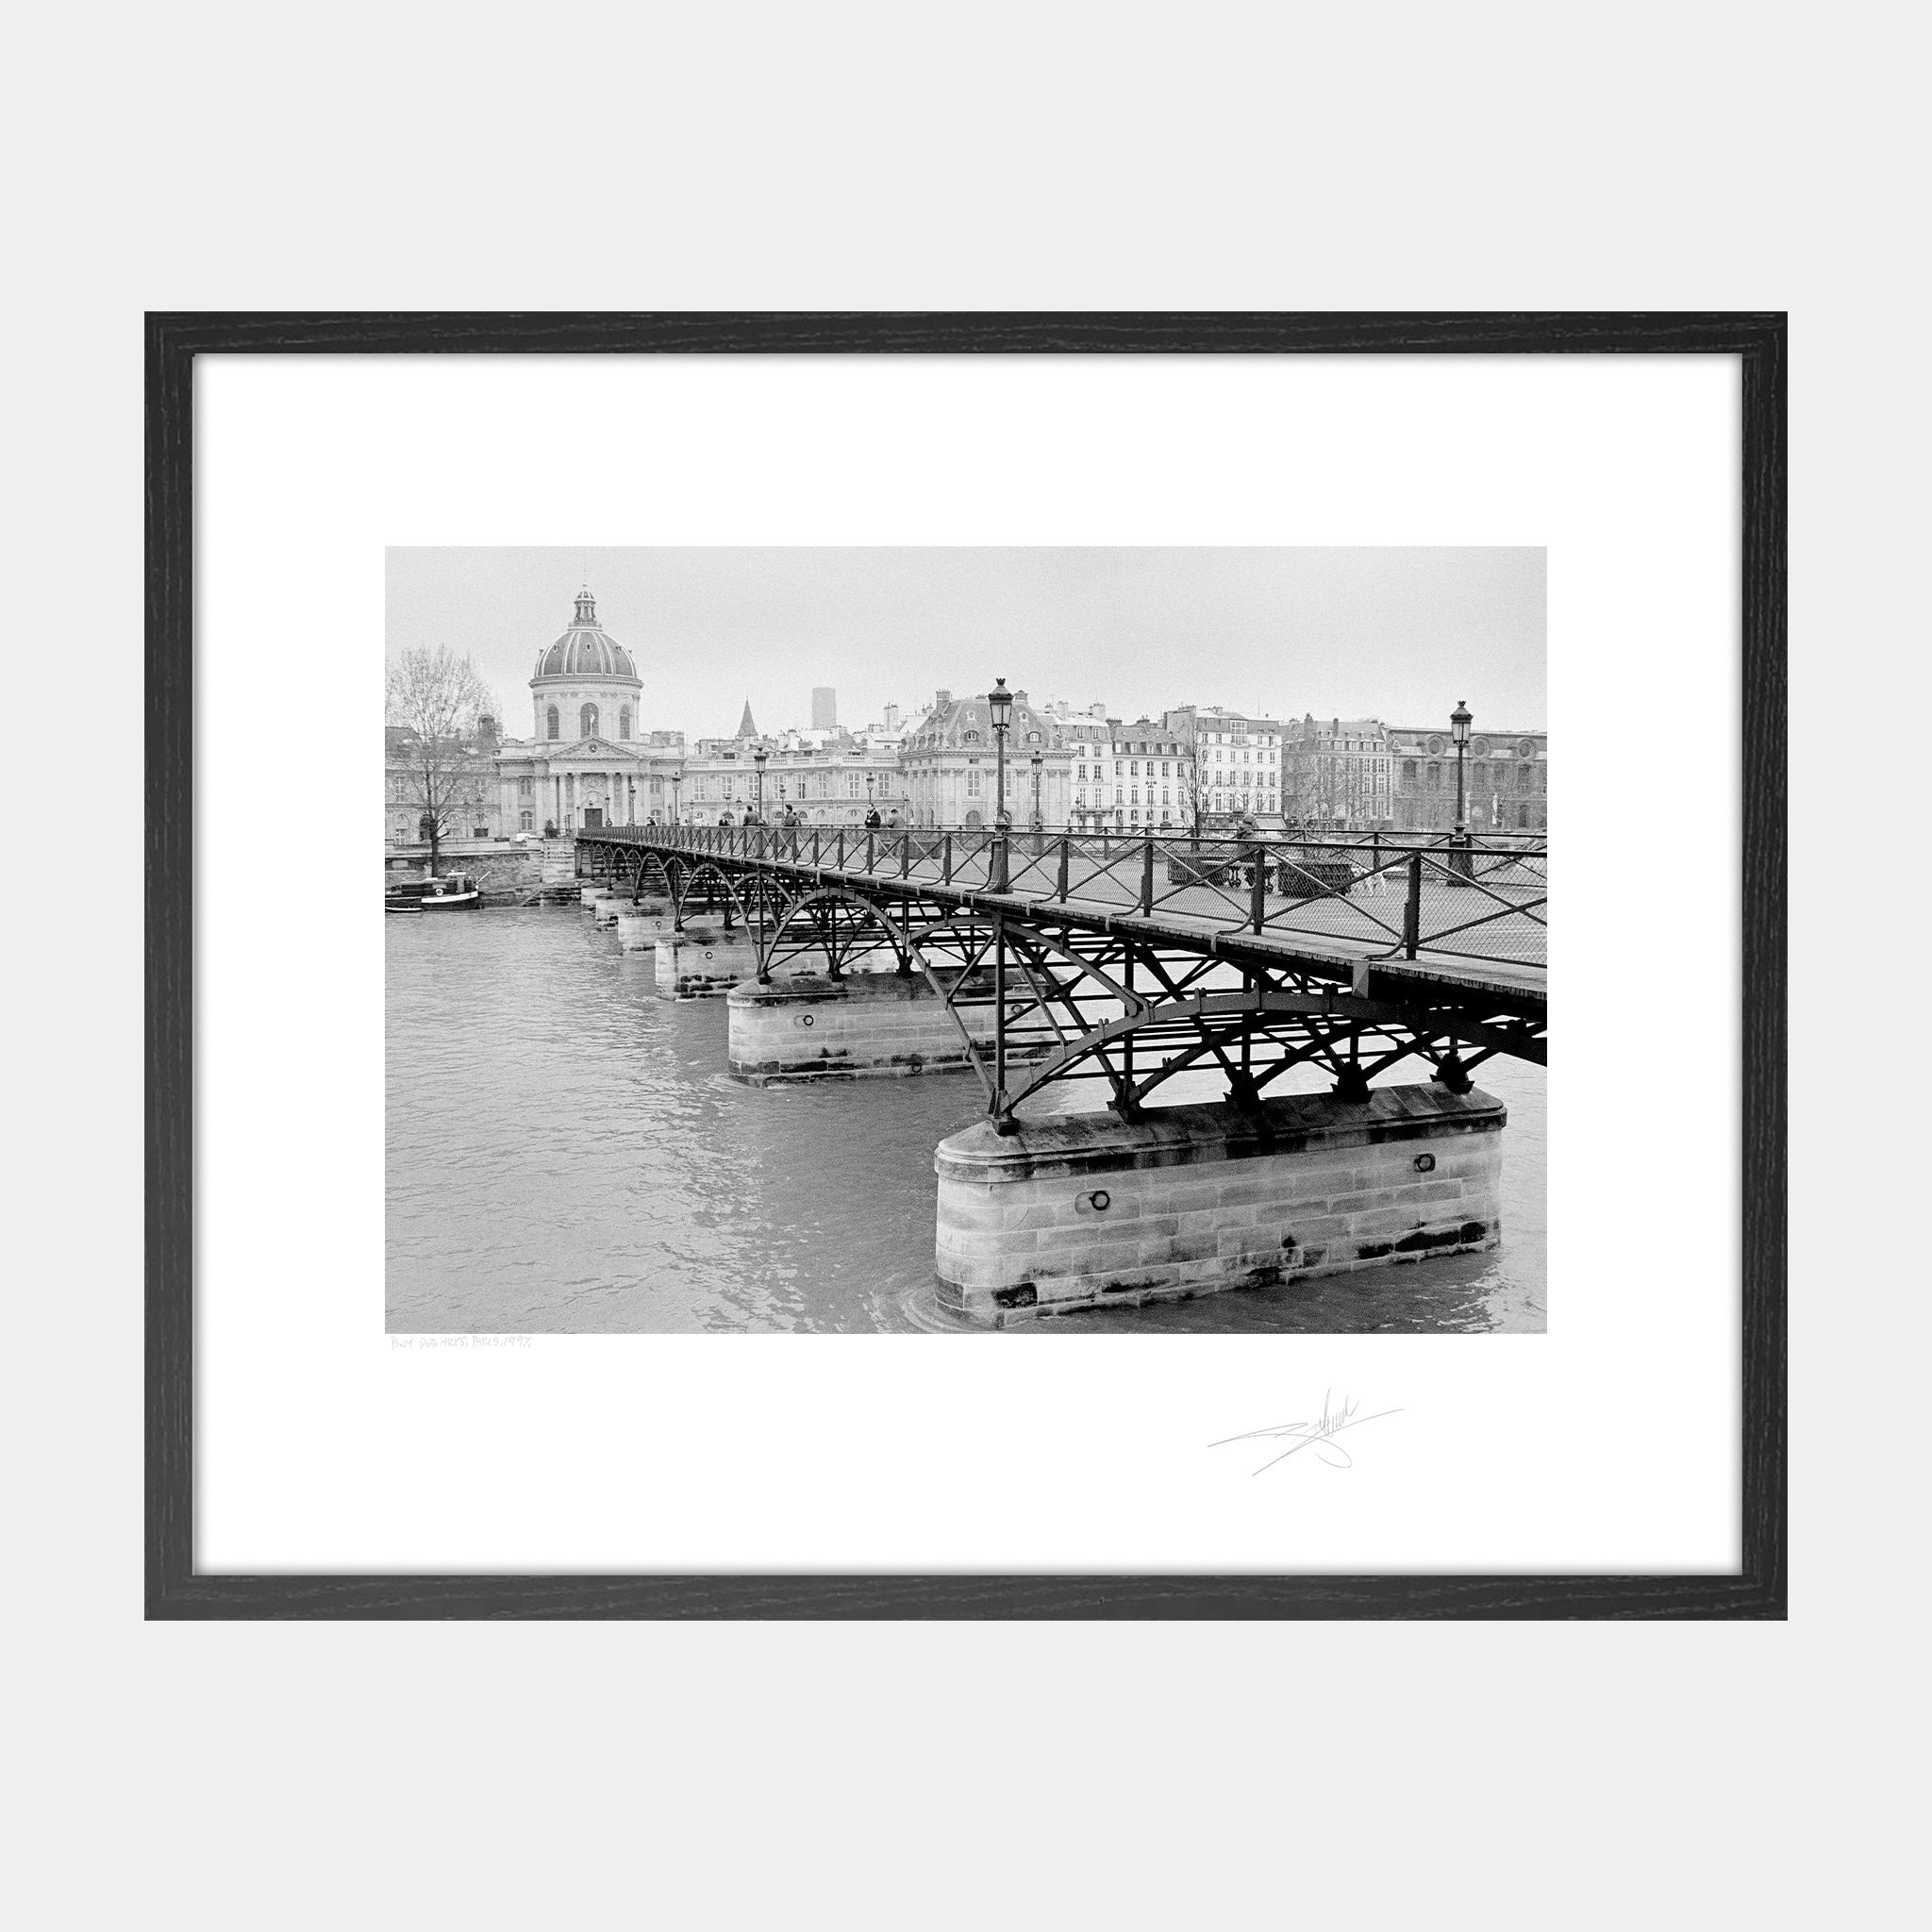 Street photography prints - Pont des arts | Giles Norman Gallery